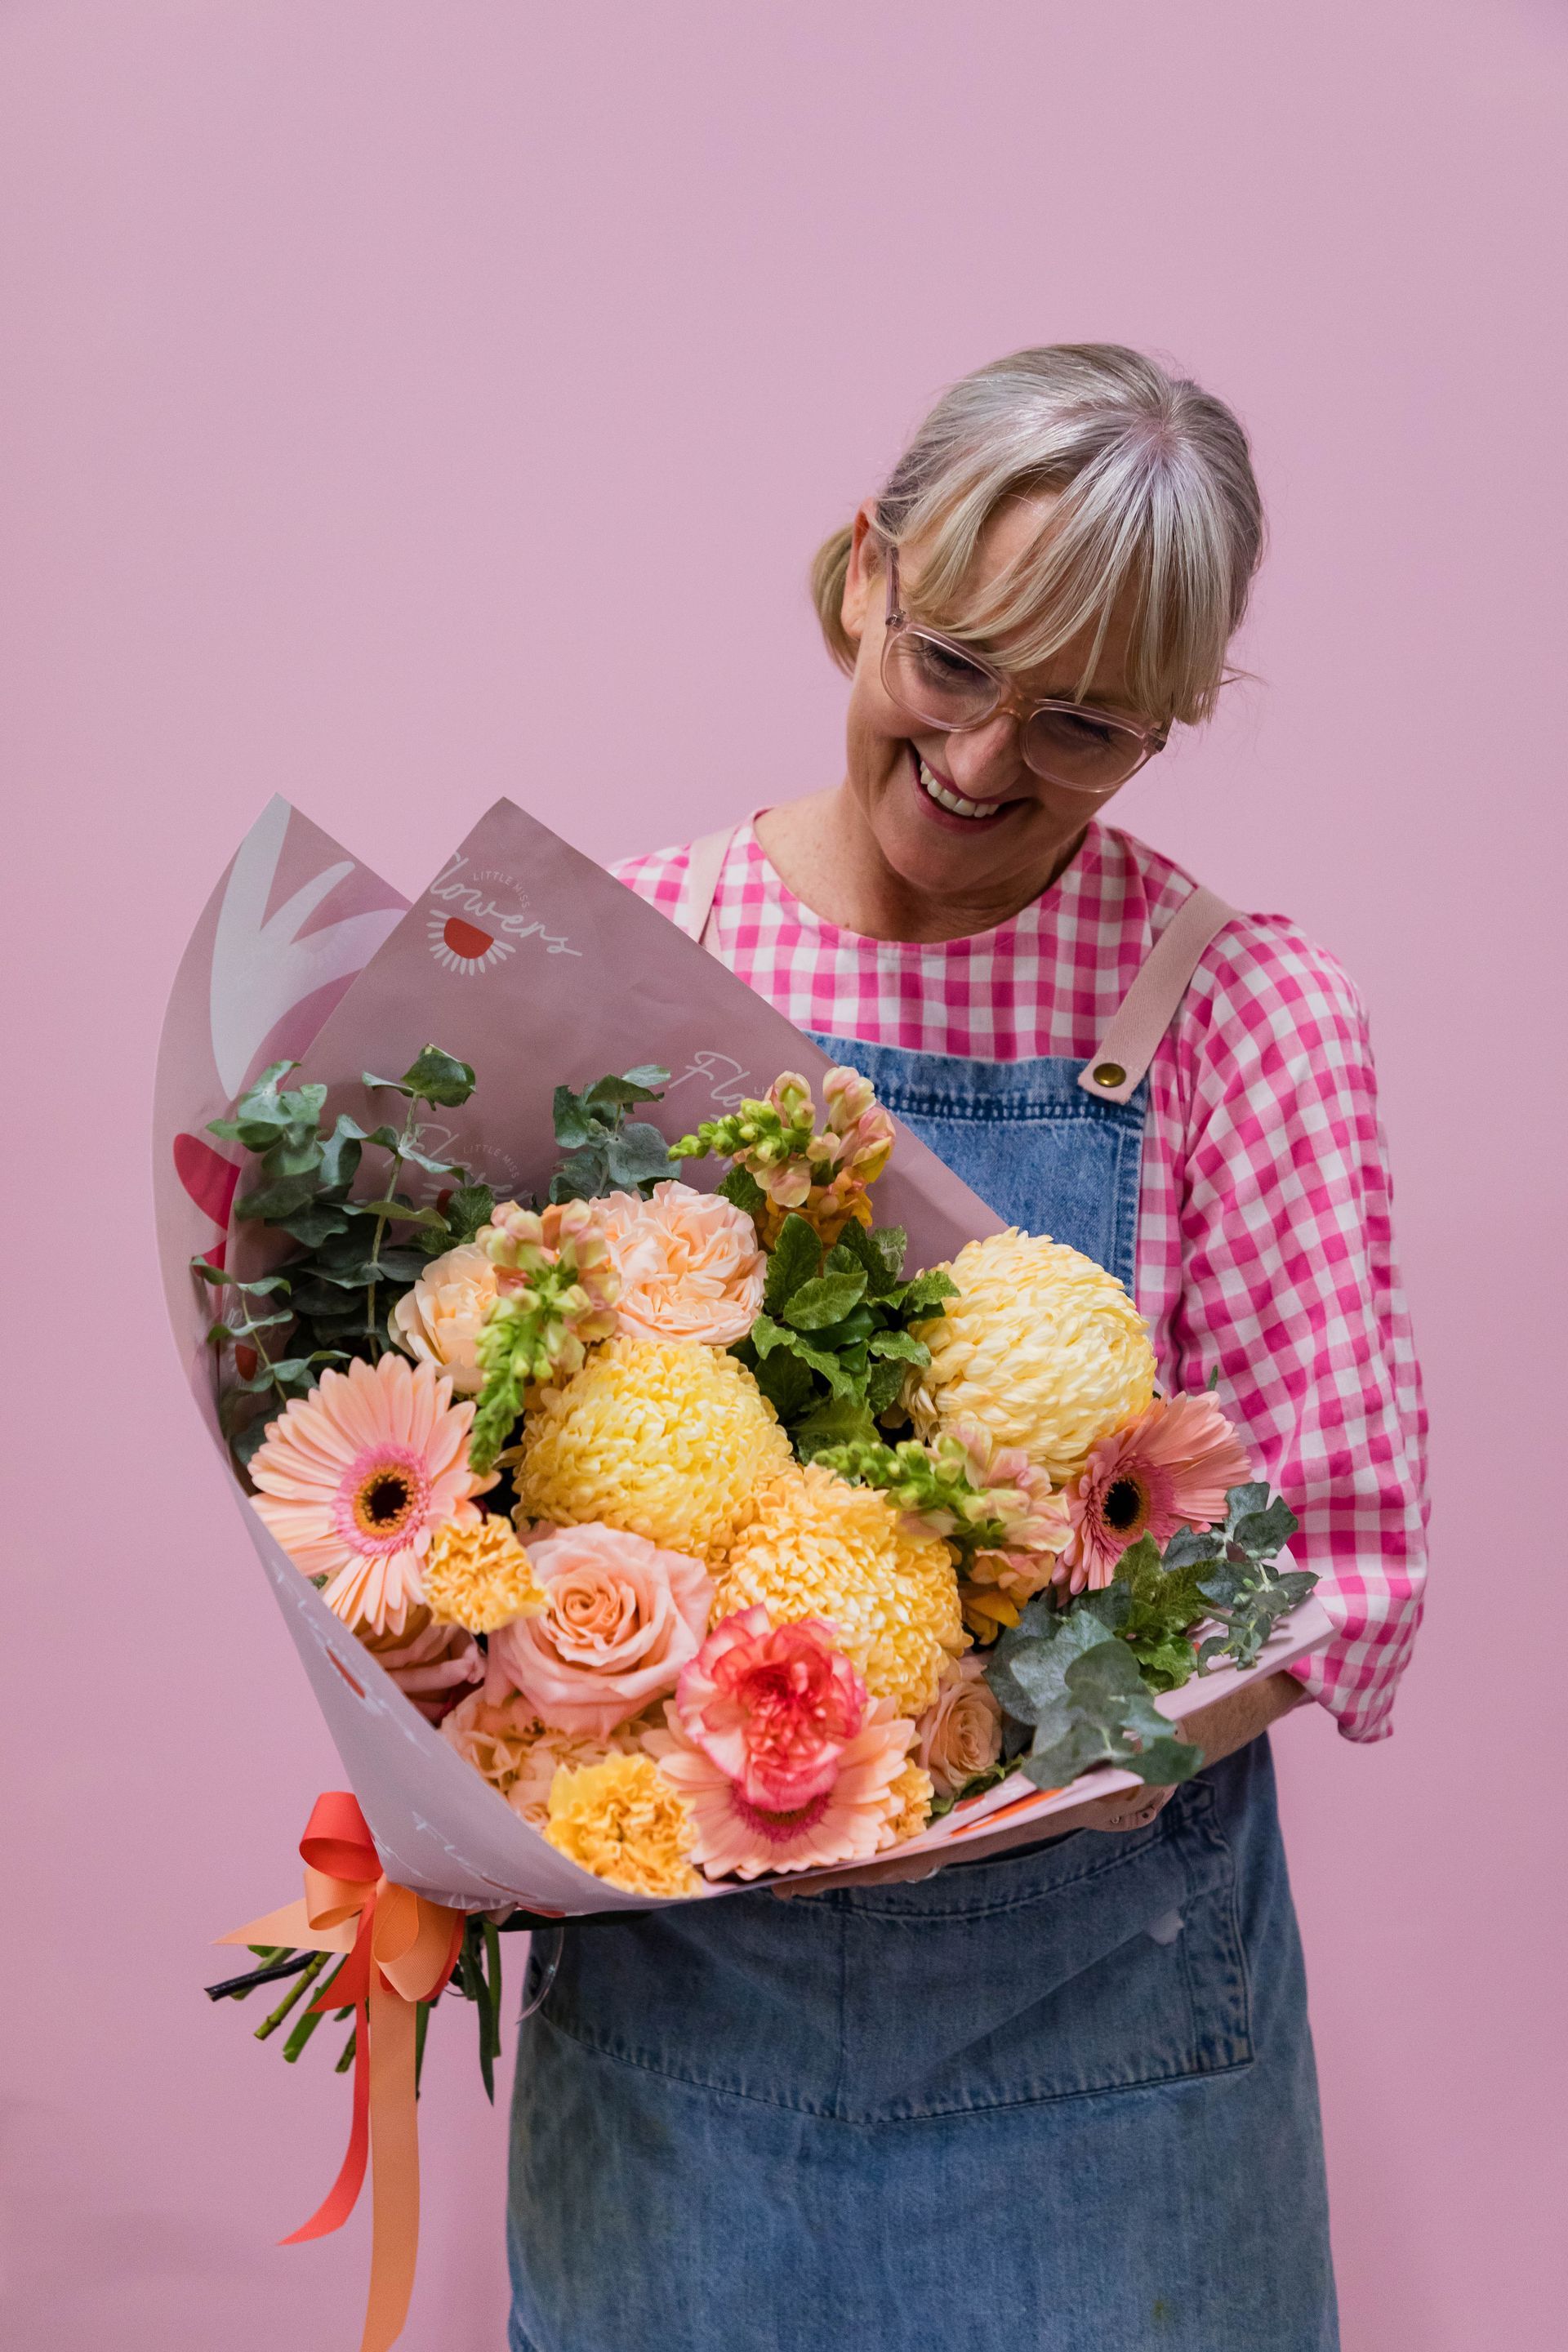 Fresh, vibrant bouquet prepared for a special delivery, embodying Darwin's natural beauty.